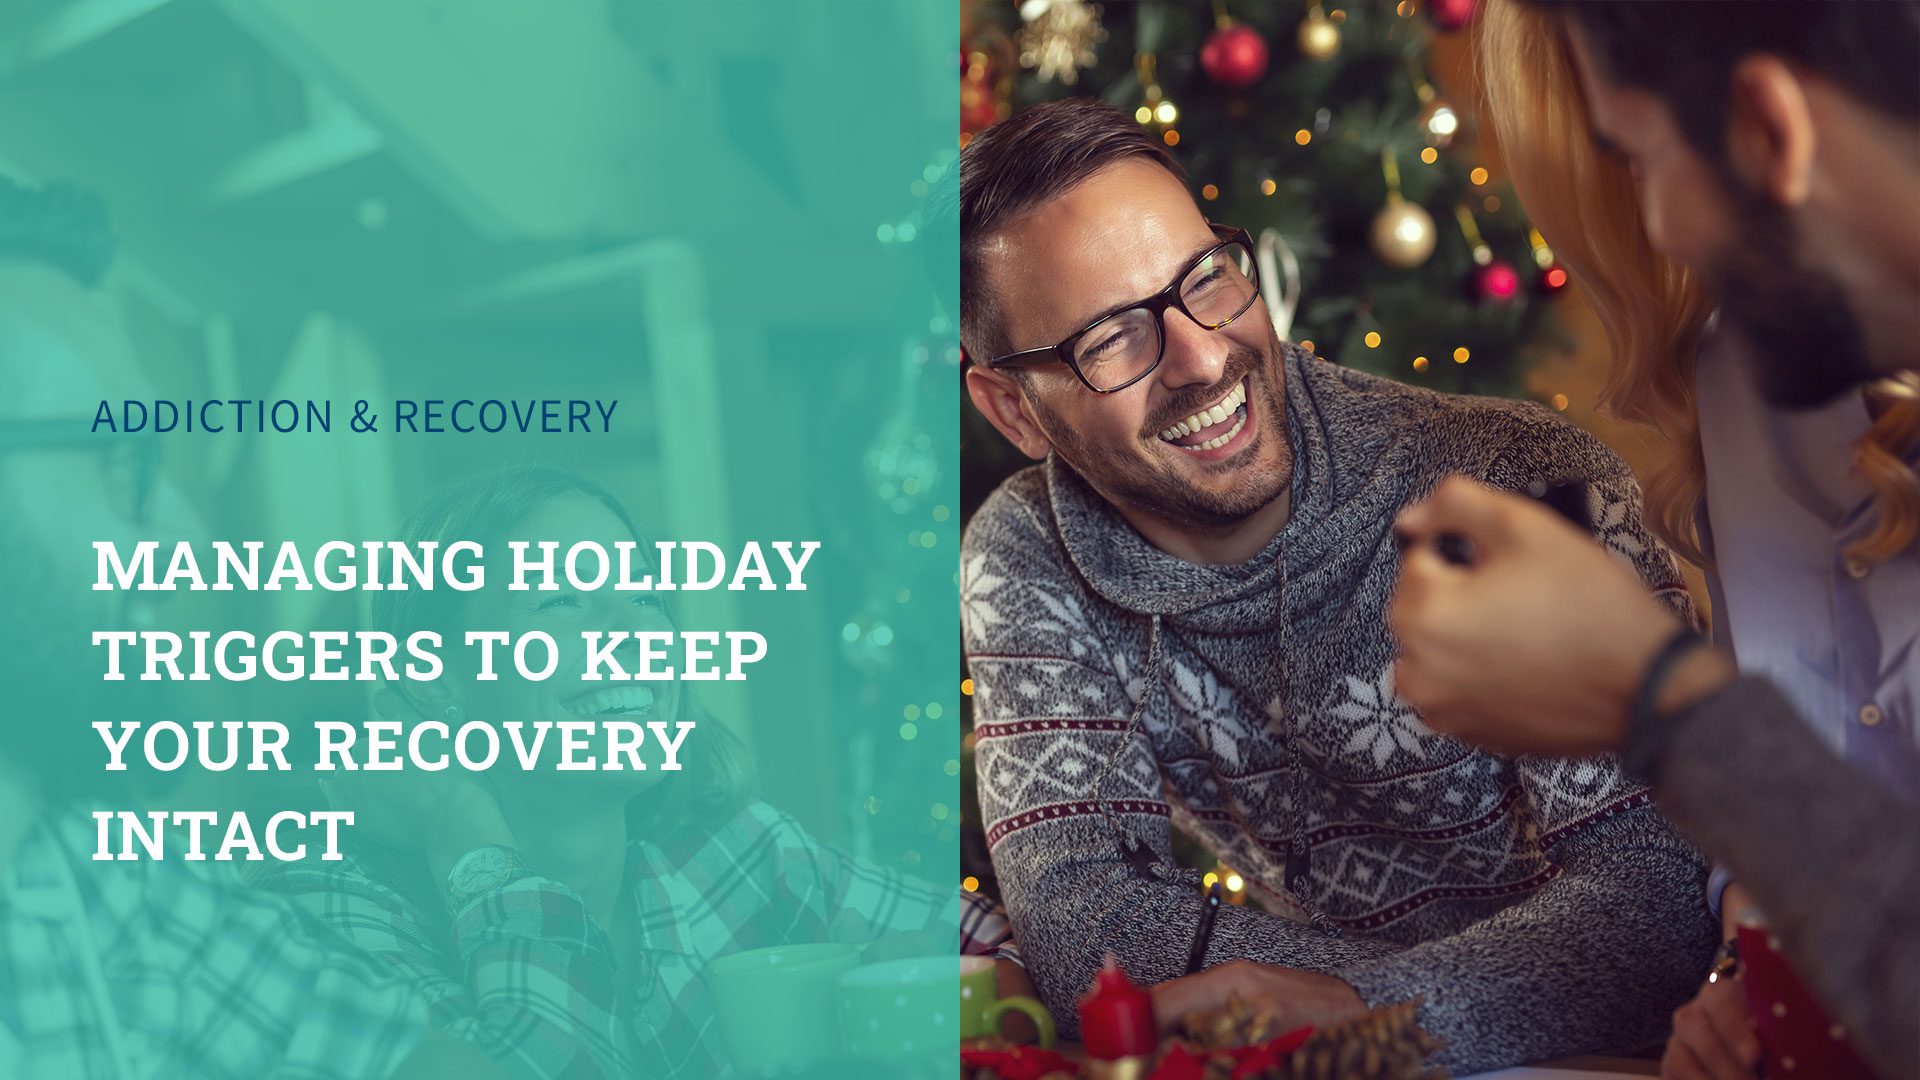 Managing Holiday Triggers to Keep Your Recovery Intact